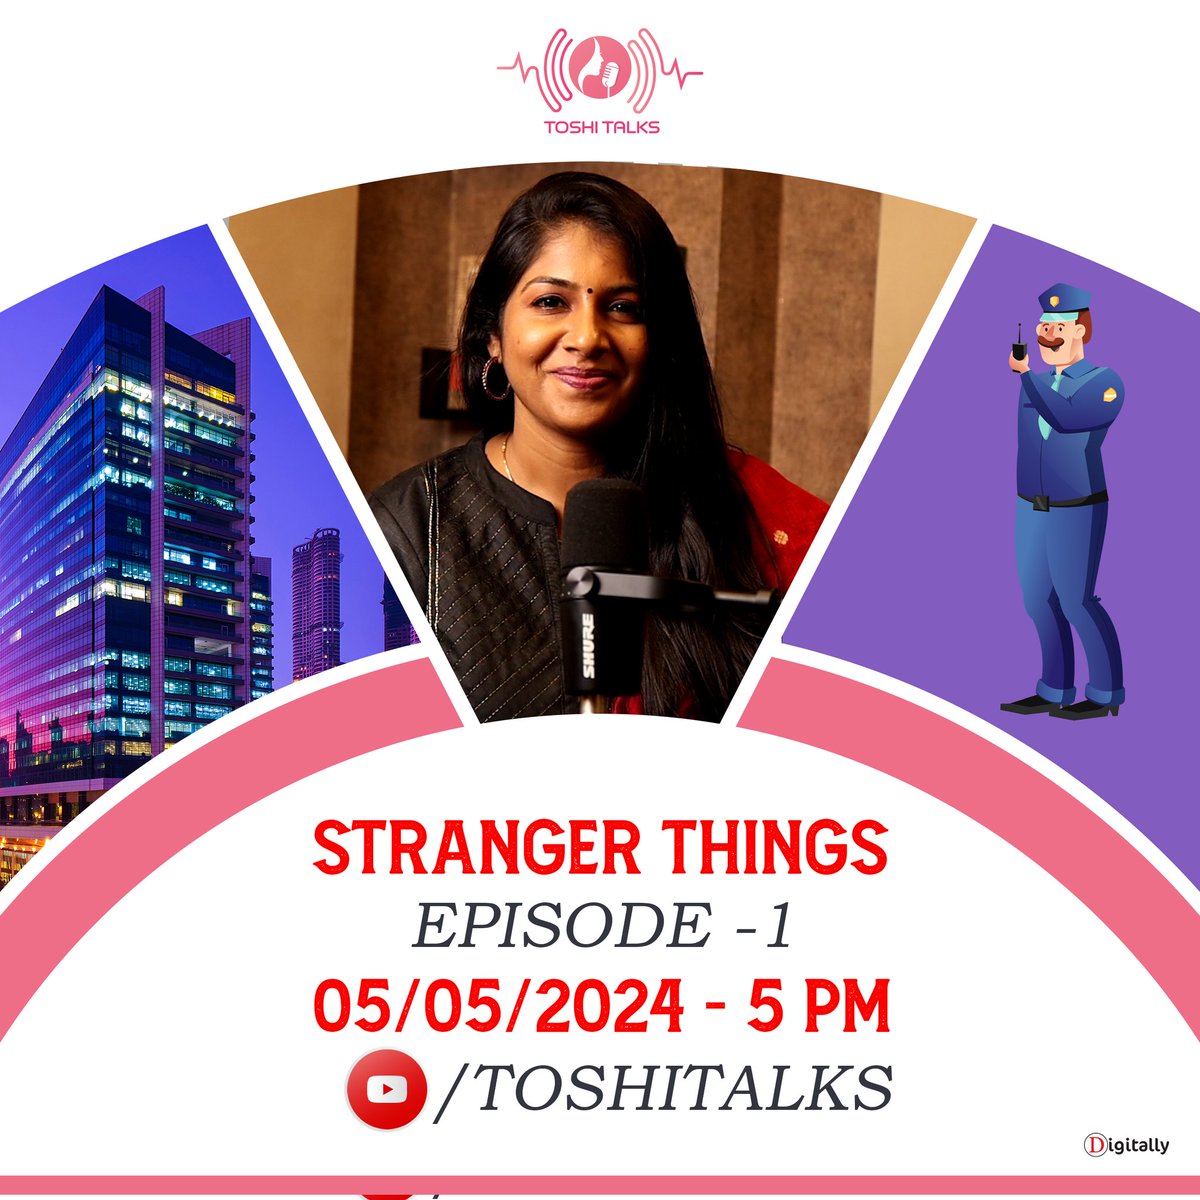 Have encounters with strangers imparted wisdom to you? Stay tuned with us ! Stranger Things Episode - 1 05/05/2024 - 5 PM Subscribe Now youtube.com/@toshitalks #ToshiTalks #ToshilaUmashankar #StrangerThings #Digitally